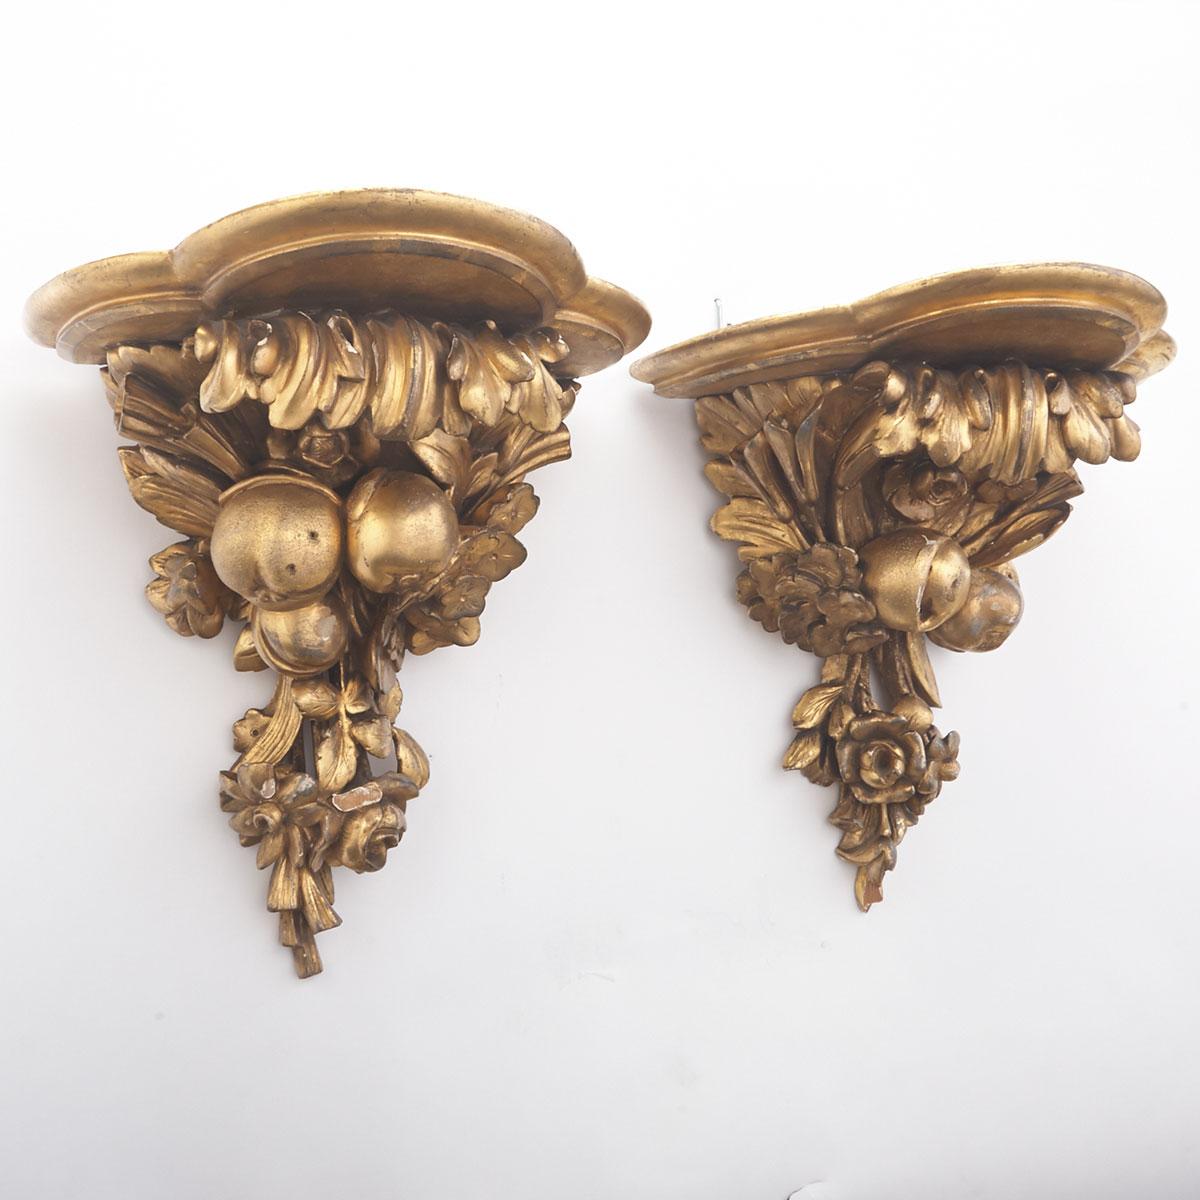 Pair of Florentine Giltwood Wall Brackets, 19th/early 20th century